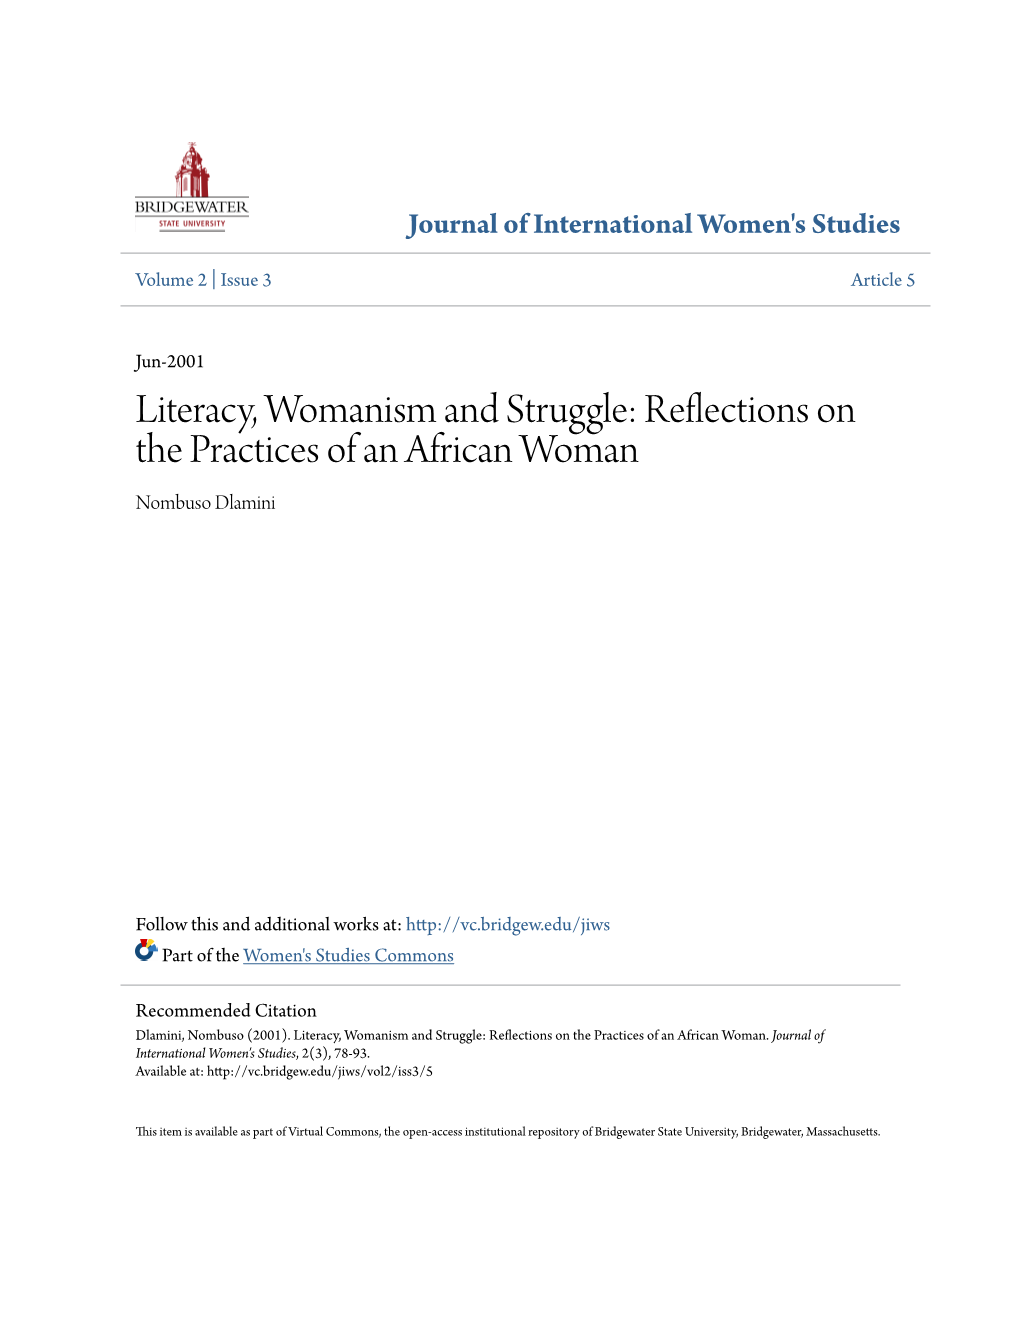 Literacy, Womanism and Struggle: Reflections on the Practices of an African Woman Nombuso Dlamini